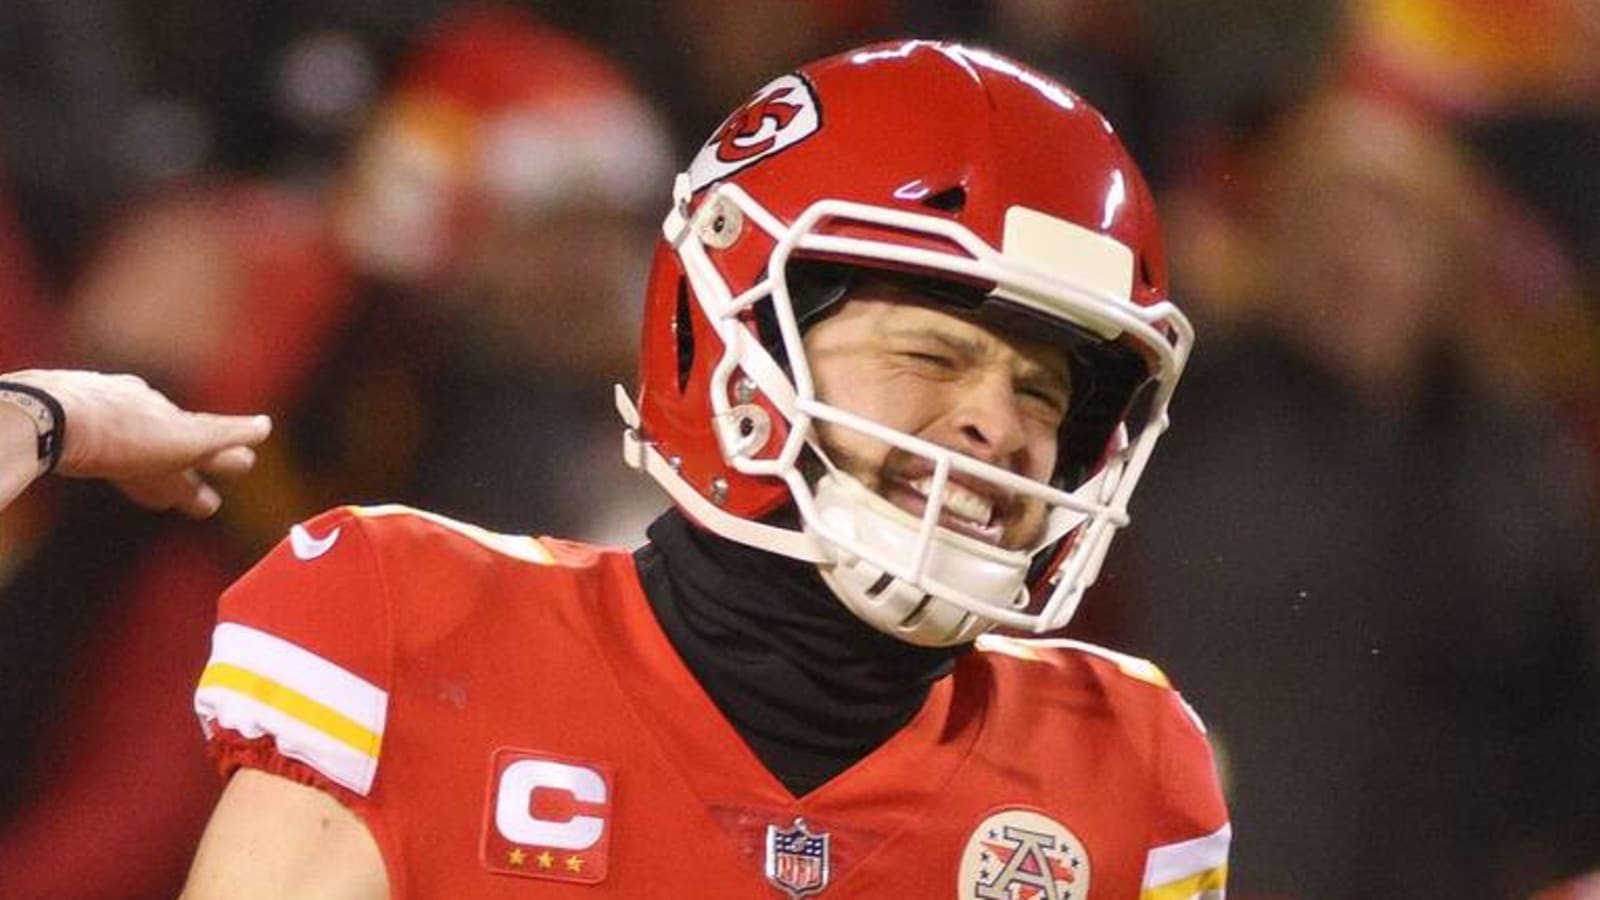 Chiefs K Harrison Butker returns to game after injury scare